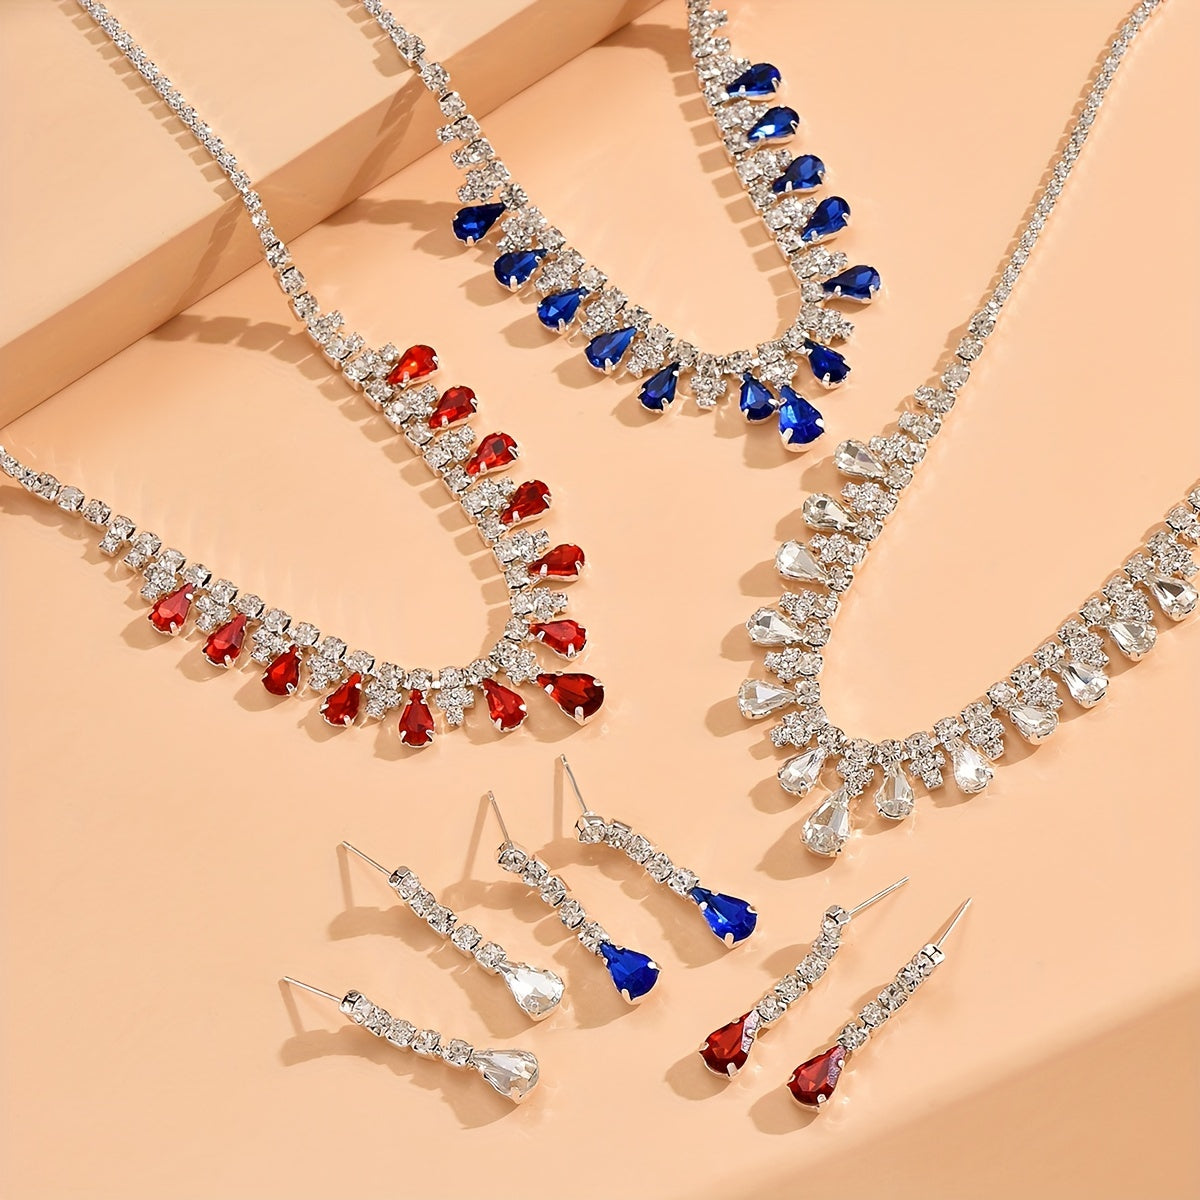 3 colors Elegant Rhinestone Wedding Jewelry Set - Silver Plated Necklace and Earrings with Royal Blue, Red, and White Stones